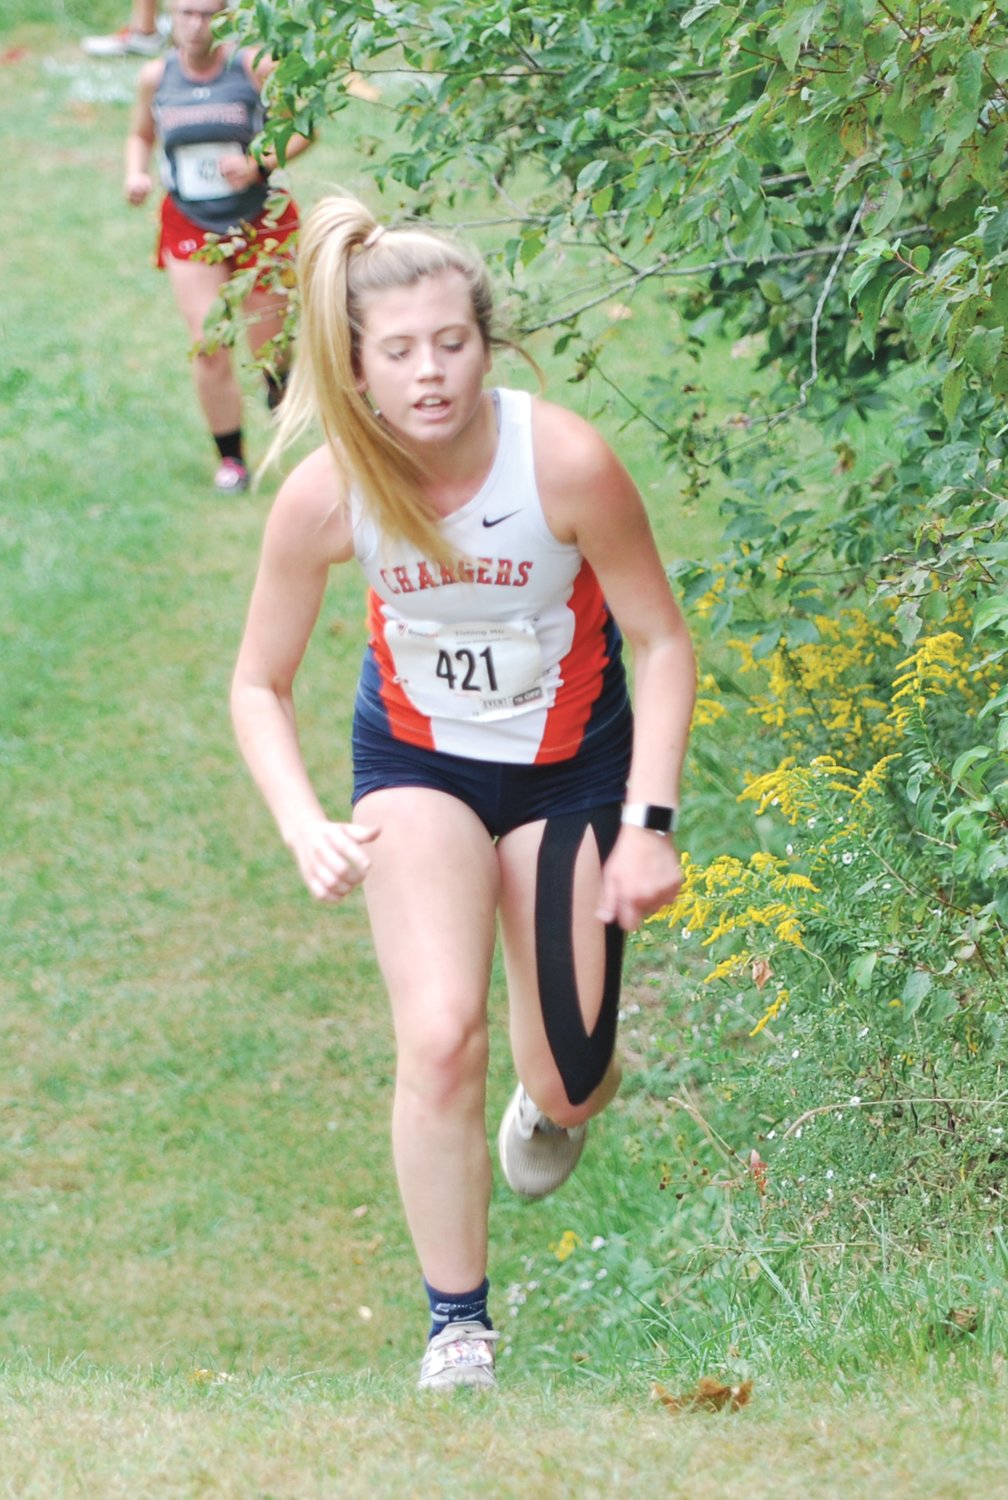 North Montgomery's Claire Bonwell placed 10th at the Montgomery County meet with a time of 26:53 on Thursday.